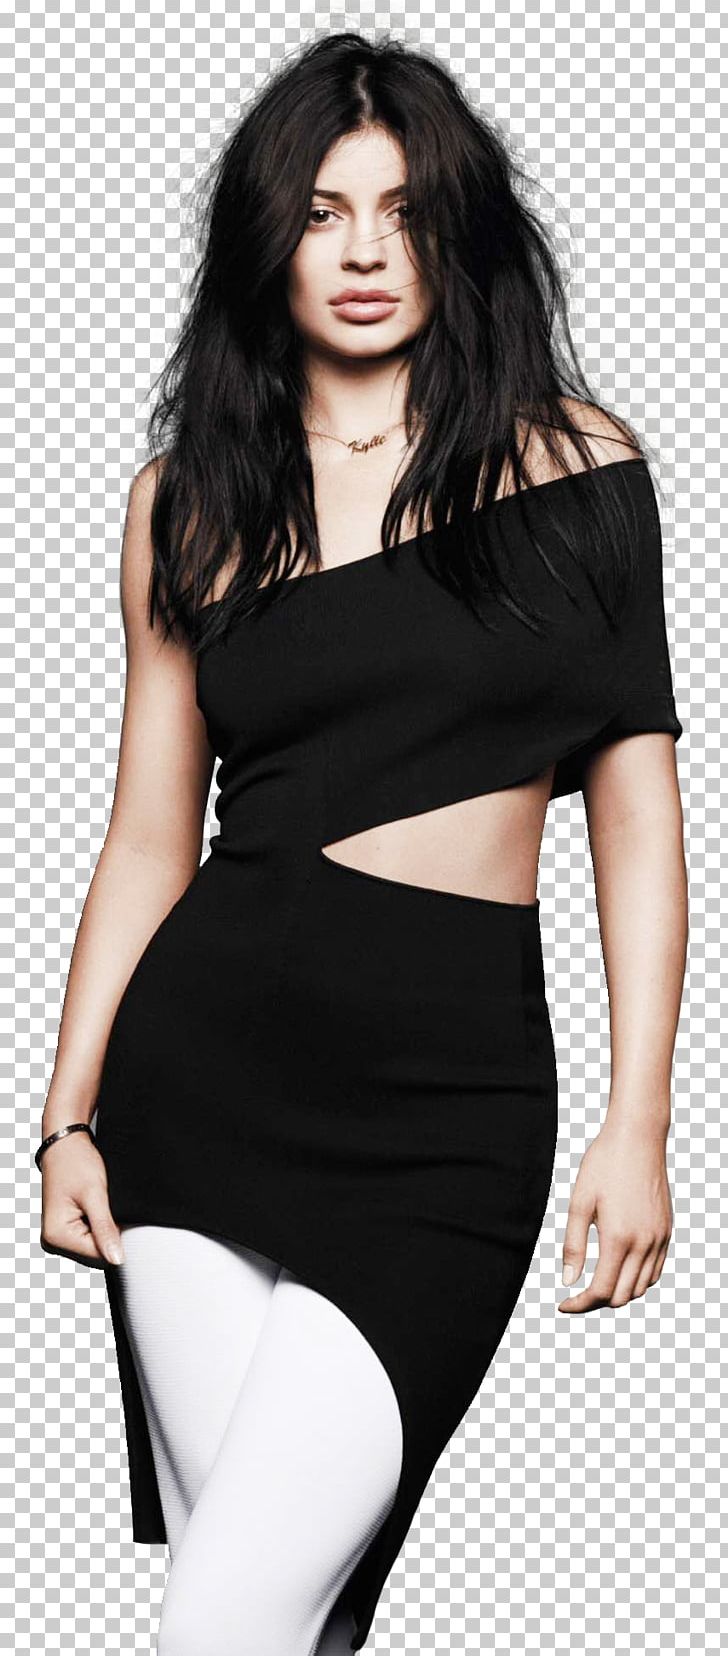 Kylie Jenner Keeping Up With The Kardashians T-shirt Fashion Female PNG, Clipart, Black, Black Hair, Brown Hair, Celebrities, Clothing Free PNG Download